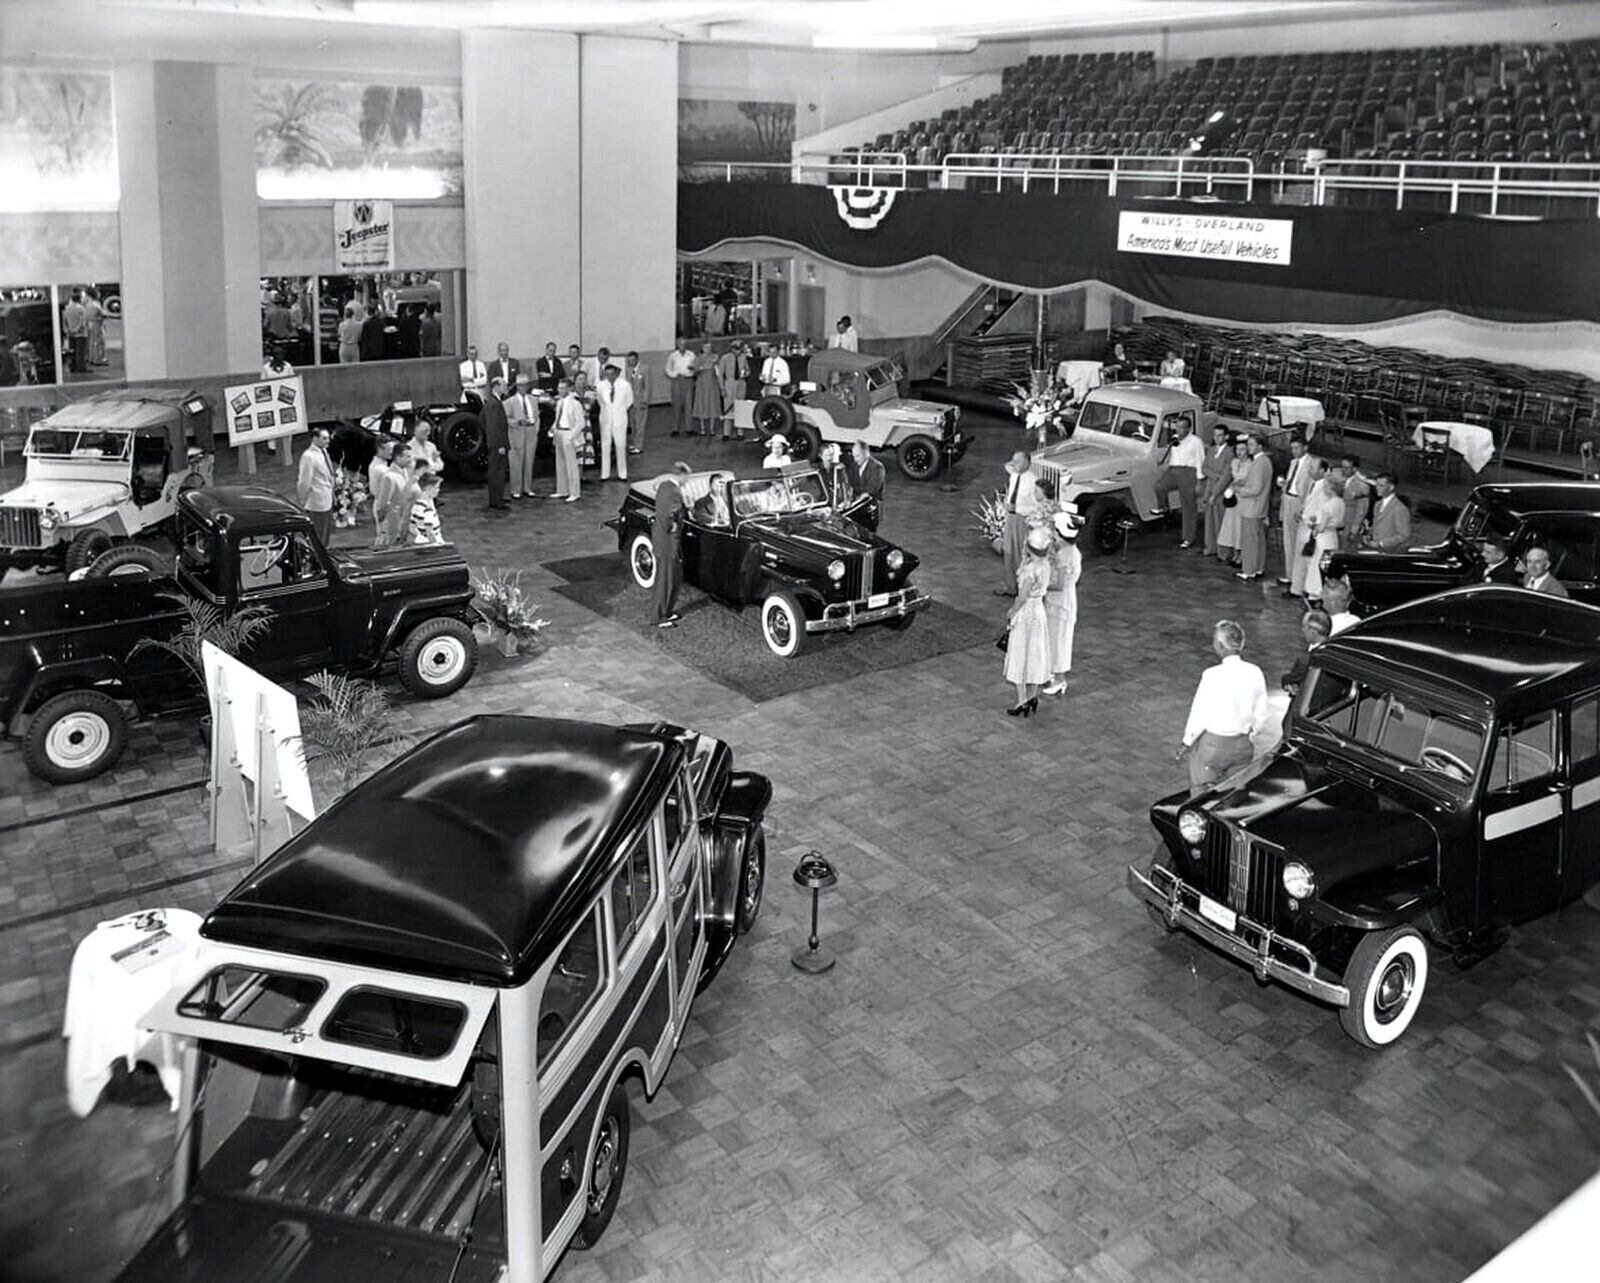 1948 WILLYS JEEP SHOW Classic Car Meet up Picture Photo 8.5x11